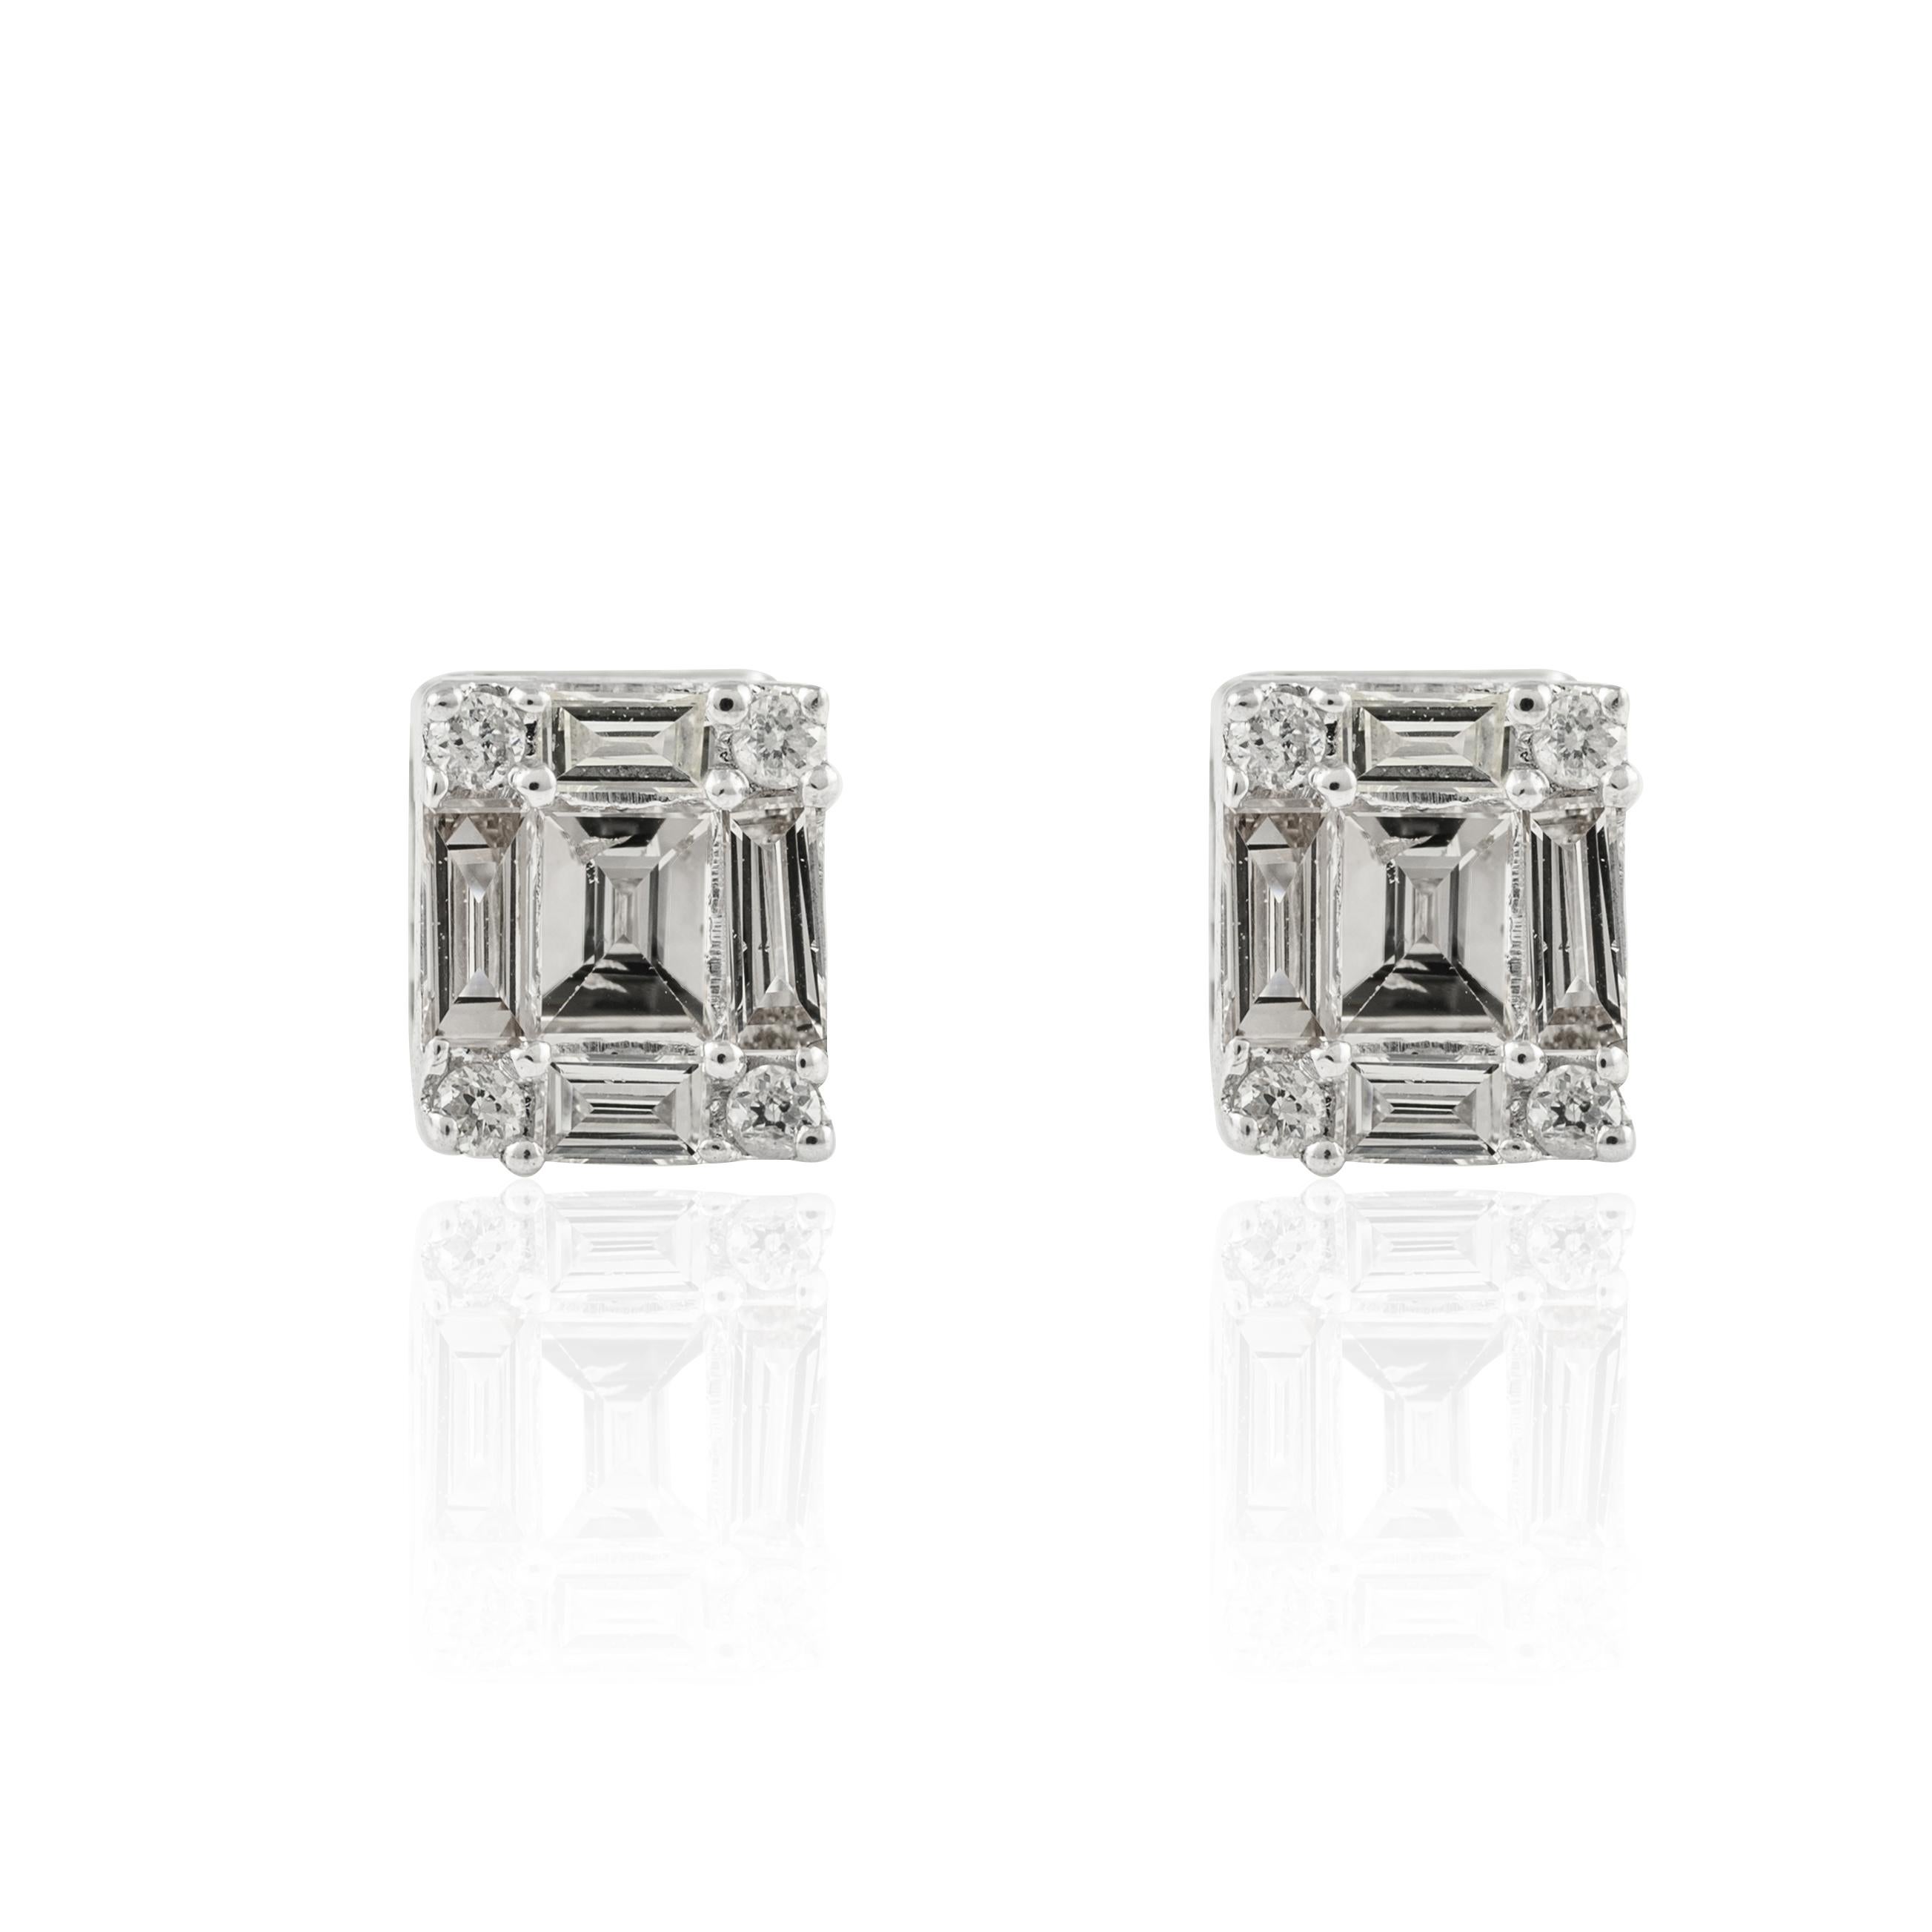 Everyday Cluster Diamond Stud Earrings in 18K Gold to make a statement with your look. You shall need stud earrings to make a statement with your look. These earrings create a sparkling, luxurious look featuring round and baguette cut